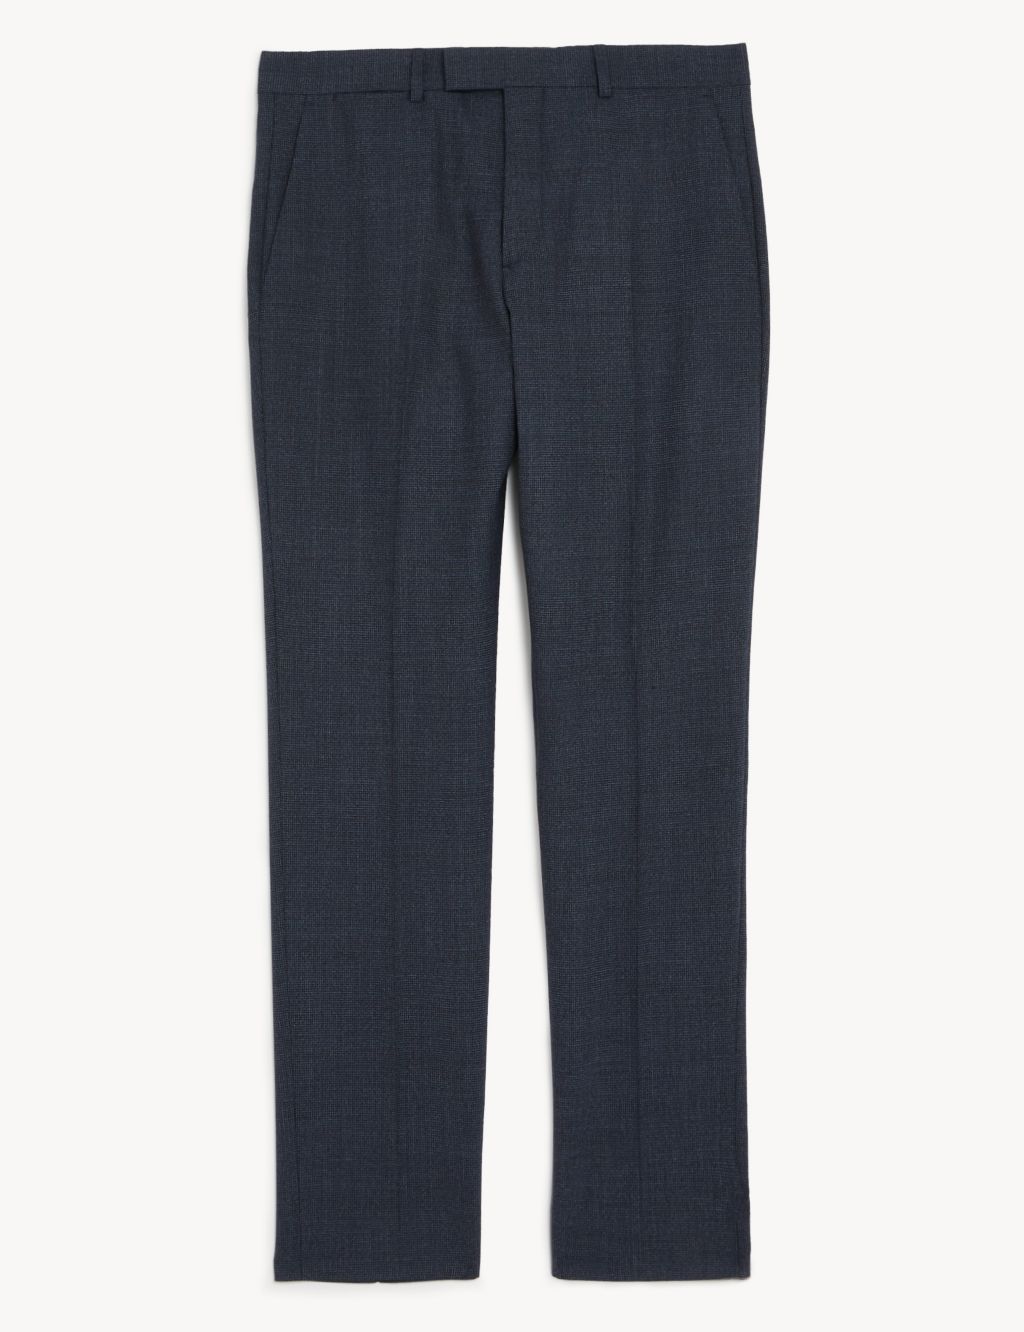 Tailored Fit Bi-Stretch Puppytooth Trousers image 2